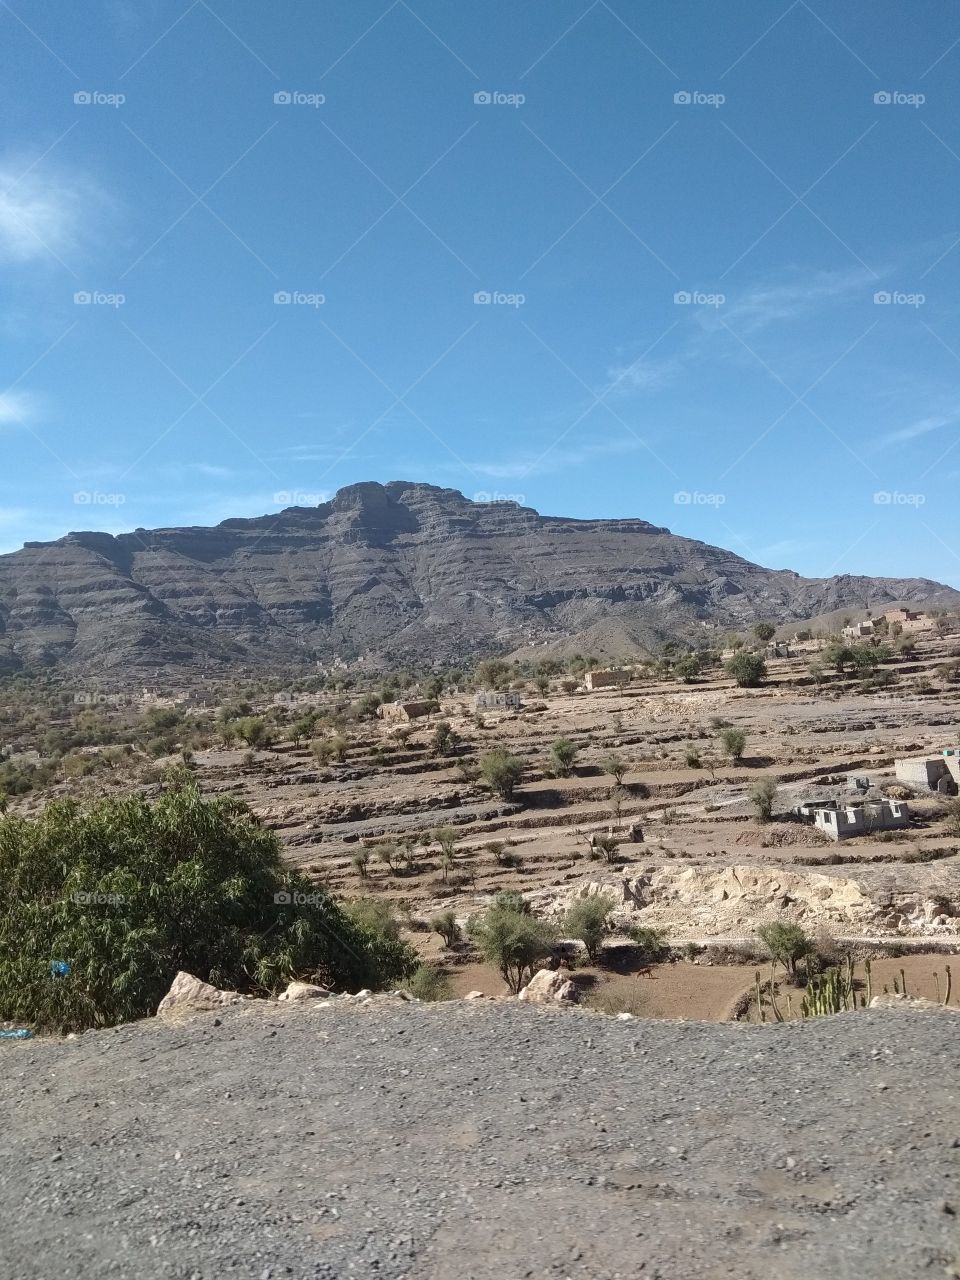 Living in top of mountains,cultivaring granded lands  on parts or whole mountains is a habit in Yemen.